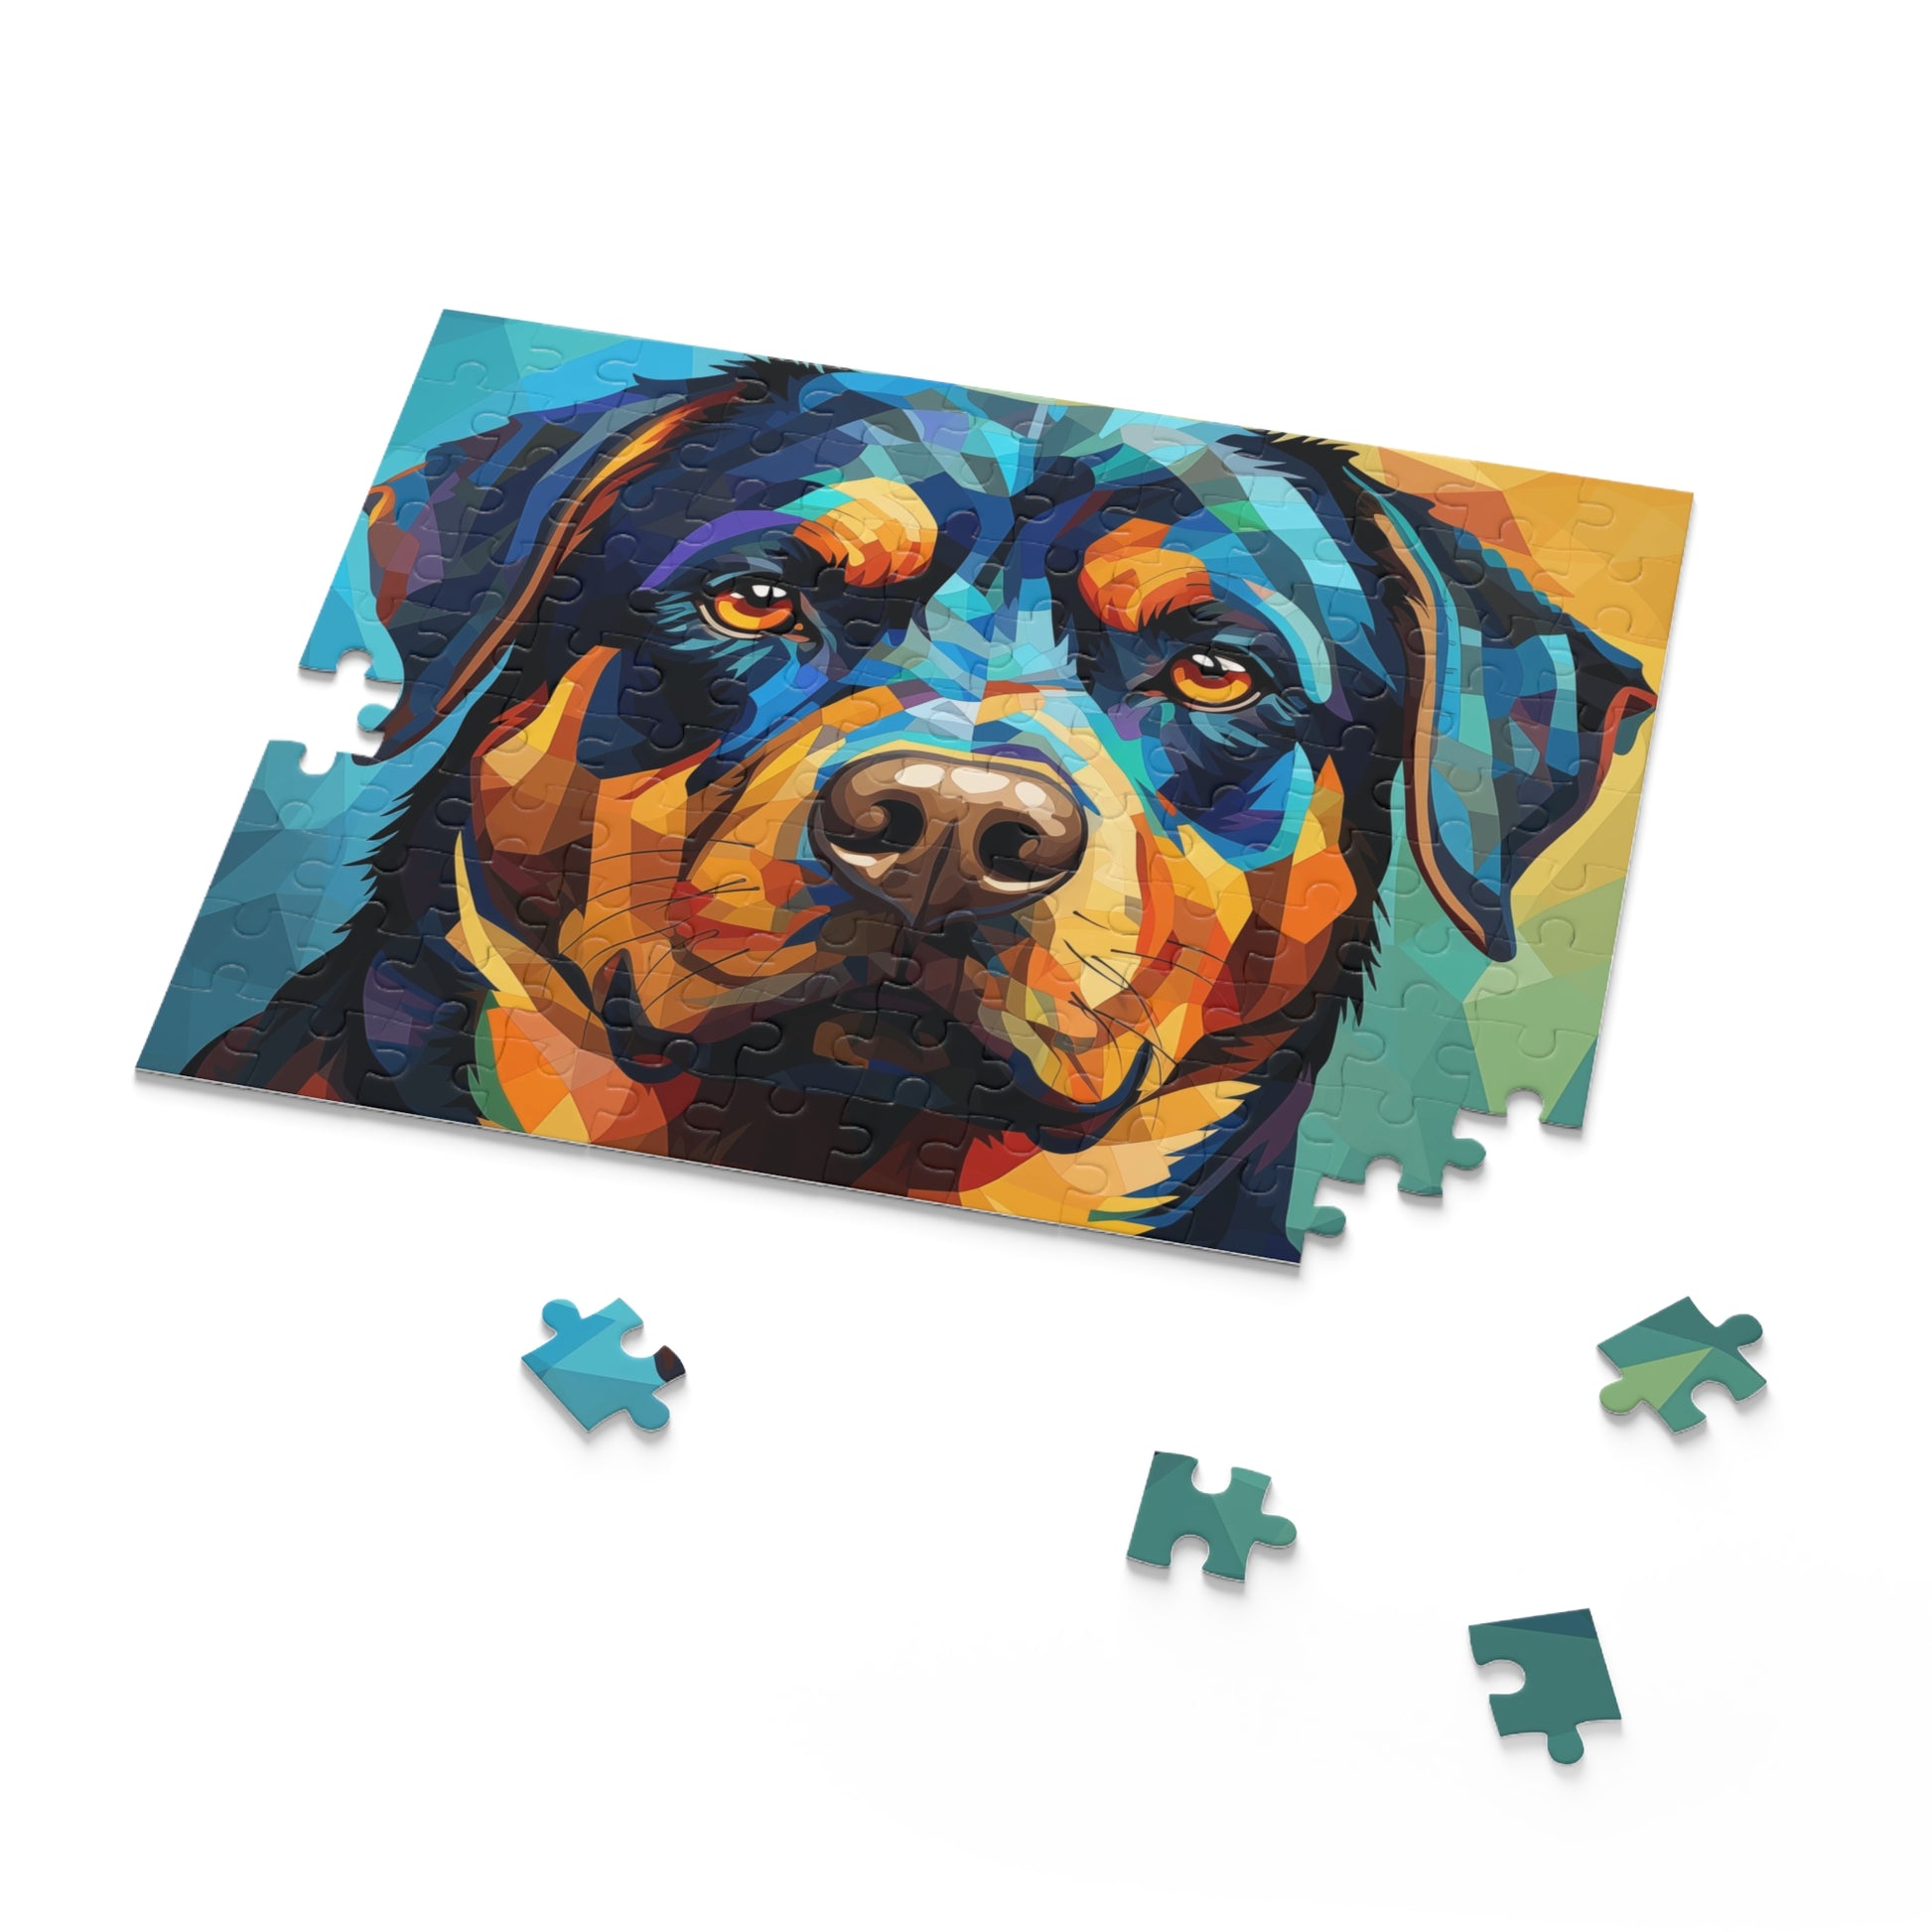 Watercolor Rottweiler Puzzle for Boys, Girls, Kids - Jigsaw Vibrant Oil Paint Dog Puzzle - Abstract Lover Gift - Rottweiler Trippy Puzzle Adult Birthday Business Jigsaw Puzzle Gift for Him Funny Humorous Indoor Outdoor Game Gift For Her Online-7